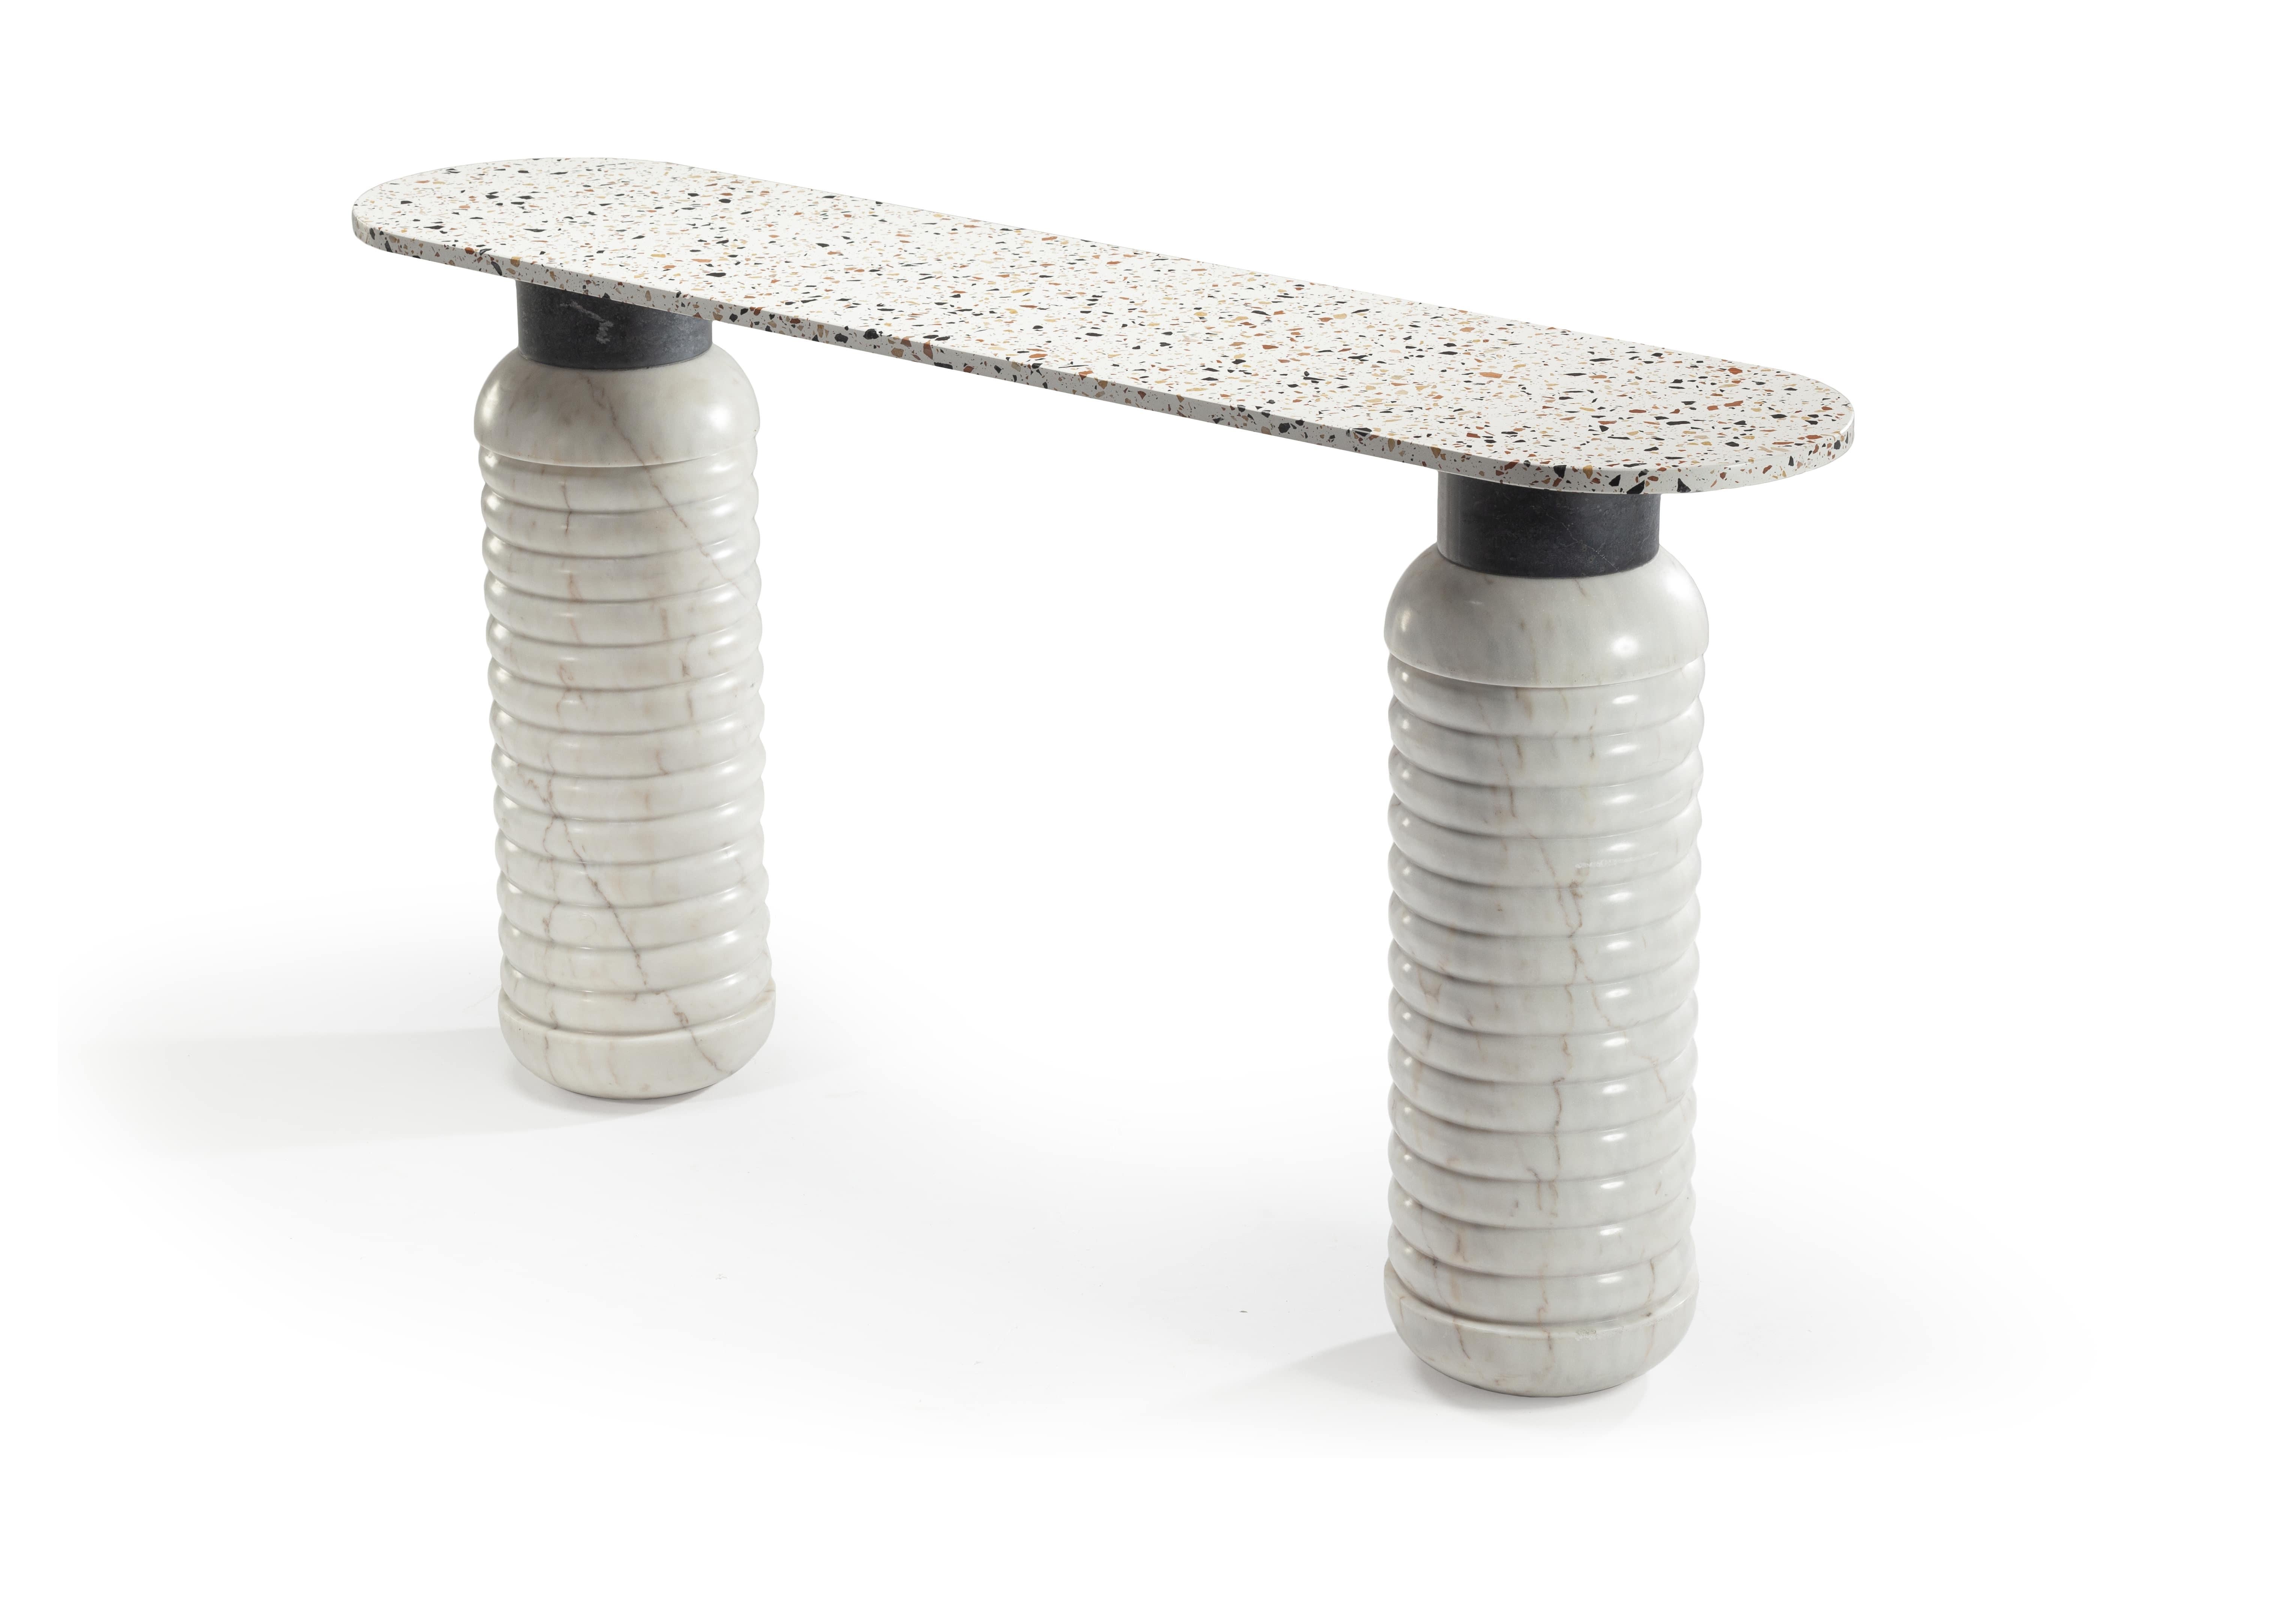 Marble Contemporary Jean Console Table
Dimensions: h 80 x w 150 x d 35 cm
Materials : top: terrazzo africa, estremoz white matte, extremoz pink matte, nero marquina or verde 
 guatemala
 middle: estremoz white matte, extremoz pink matte or nero